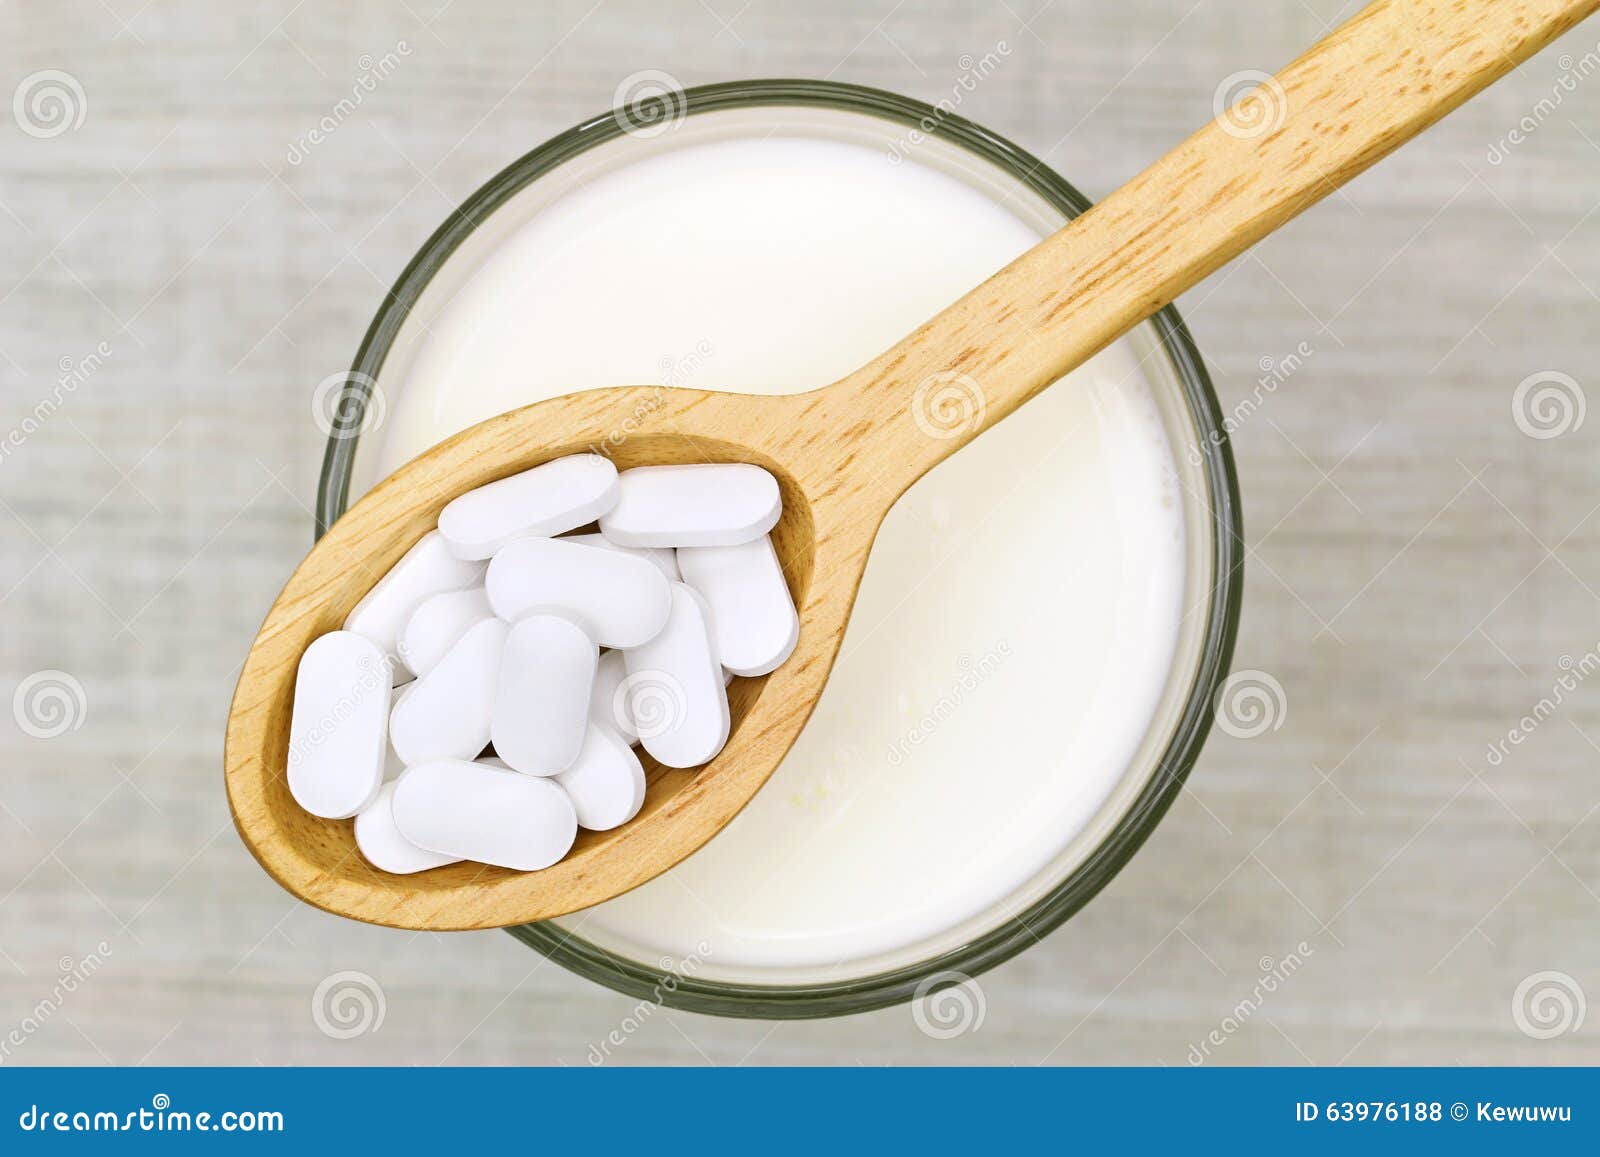 calcium carbonate tablets above a glass of fresh milk